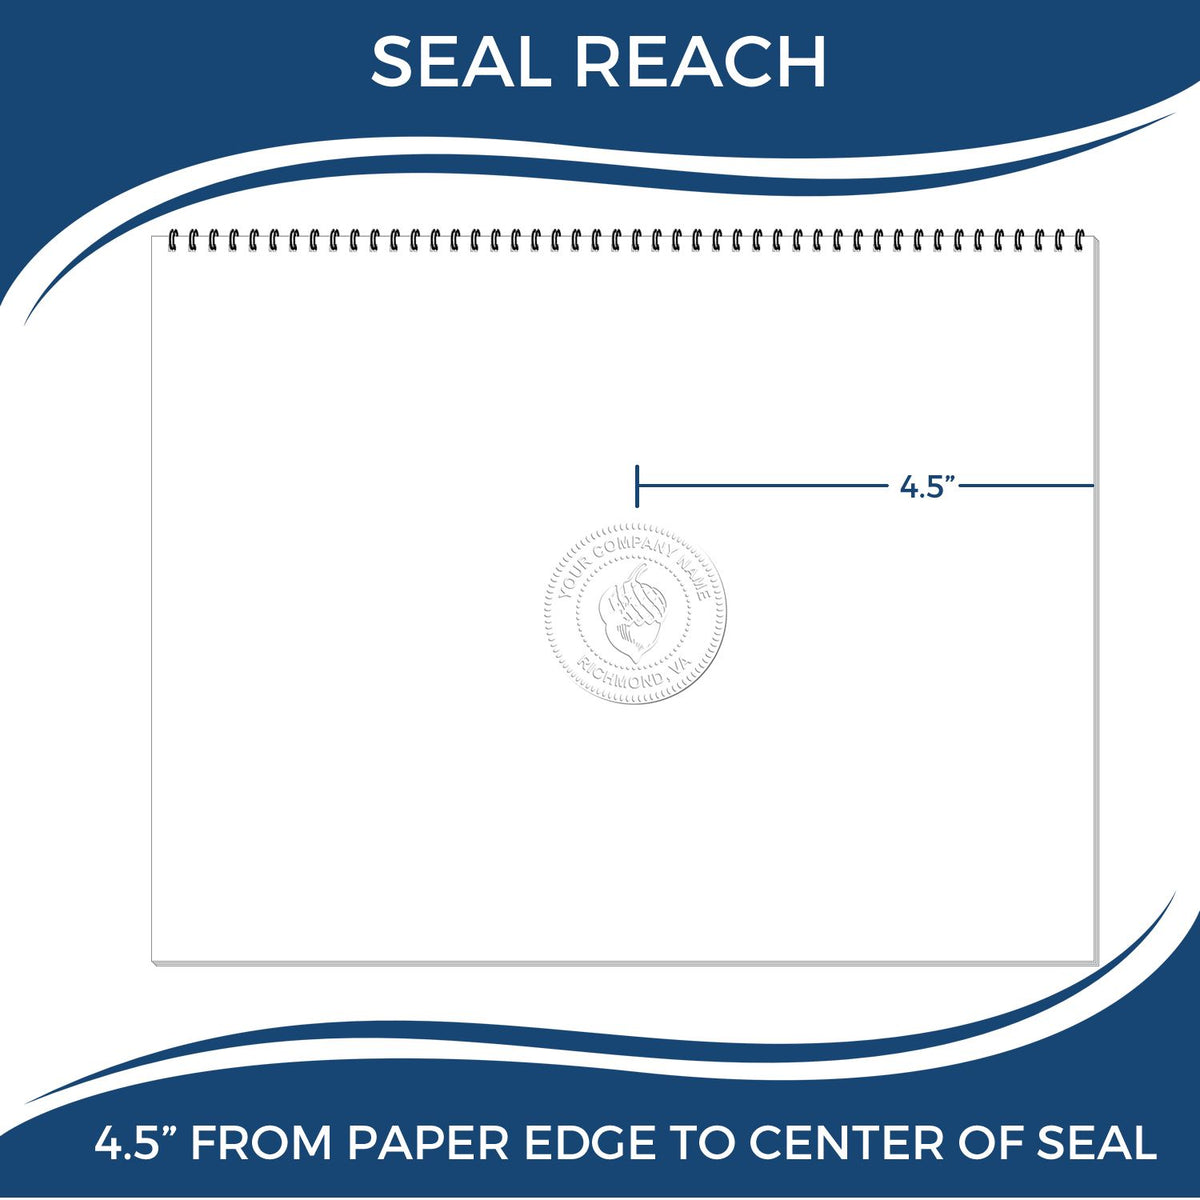 An infographic showing the seal reach which is represented by a ruler and a miniature seal image of the Extended Long Reach Idaho Architect Seal Embosser